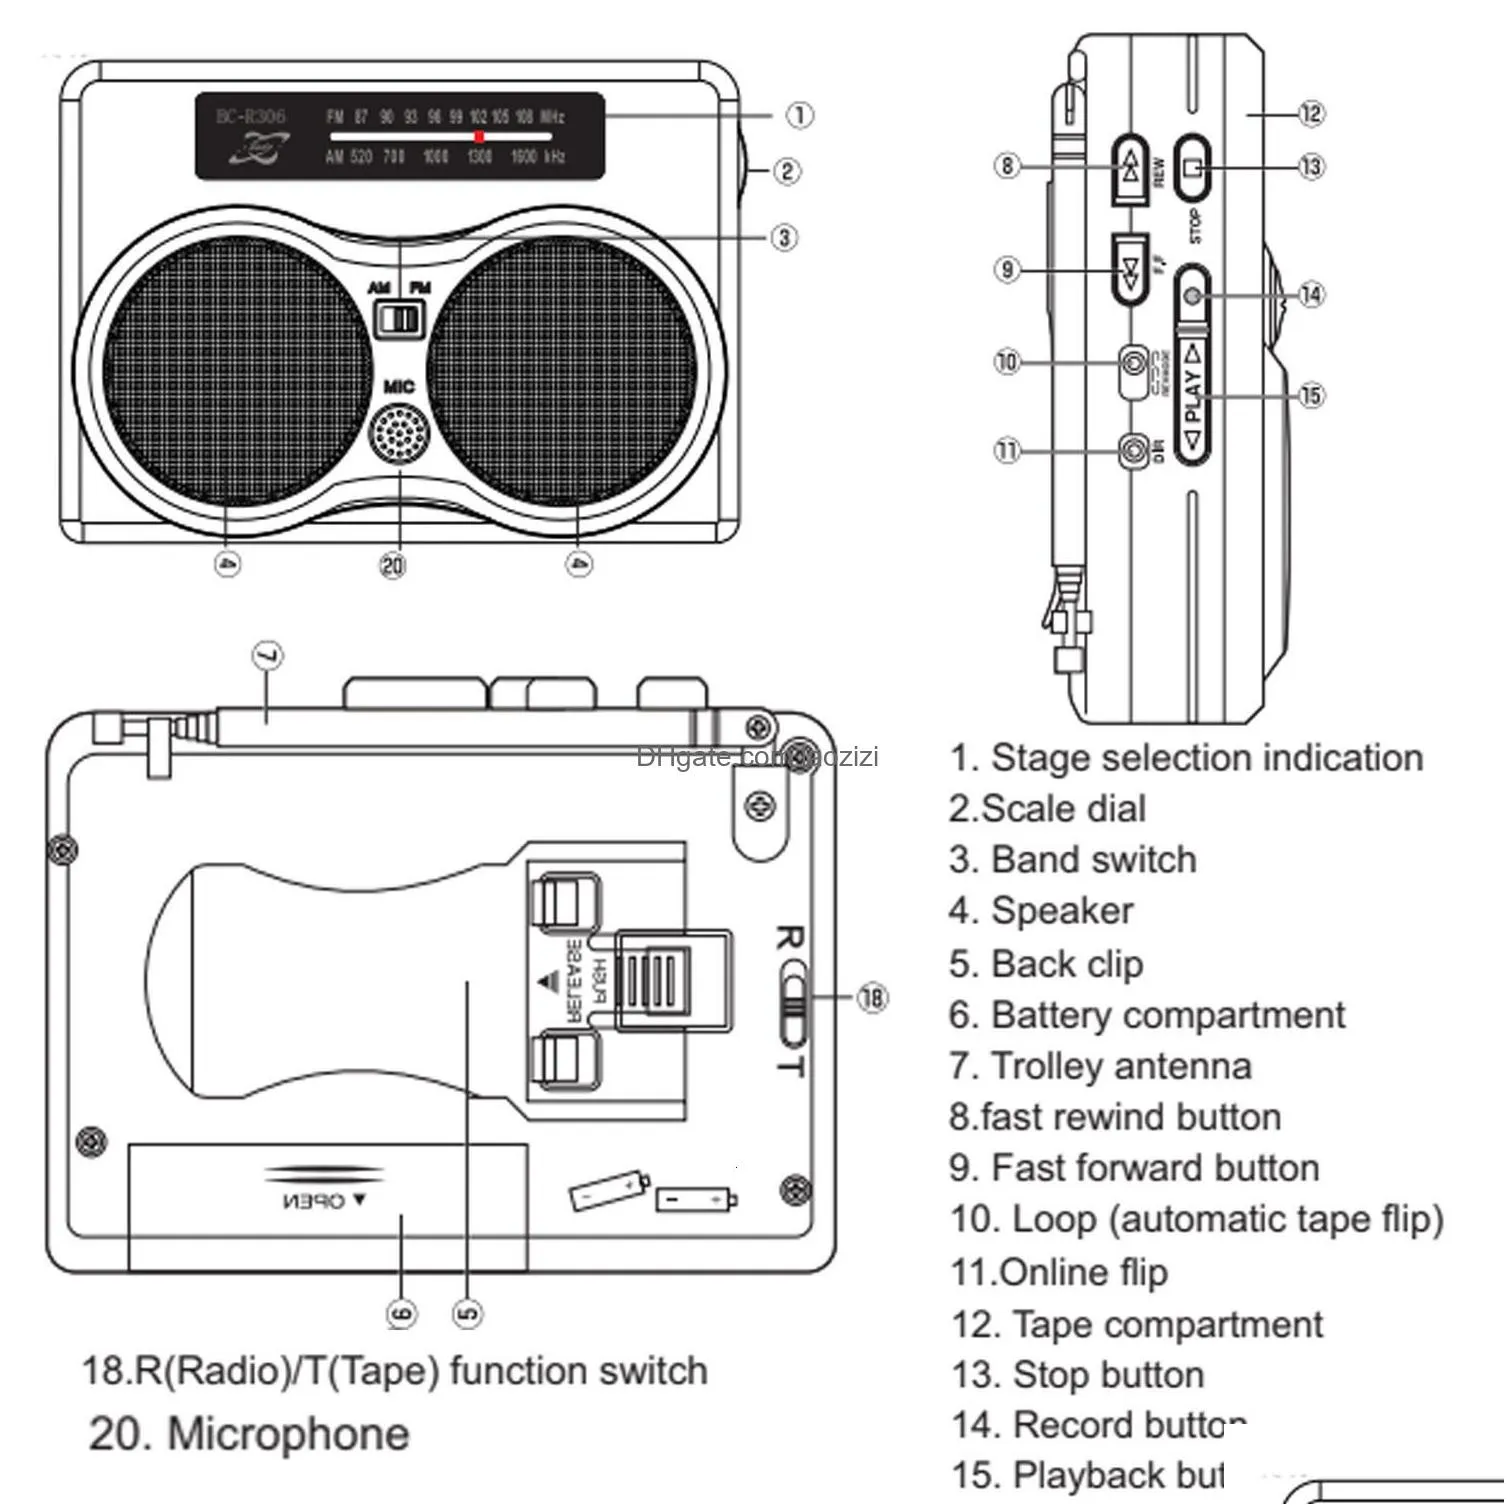 radio portable tape retro fm am ser walkman recorder with headset support builtinexternal microphone record 230331